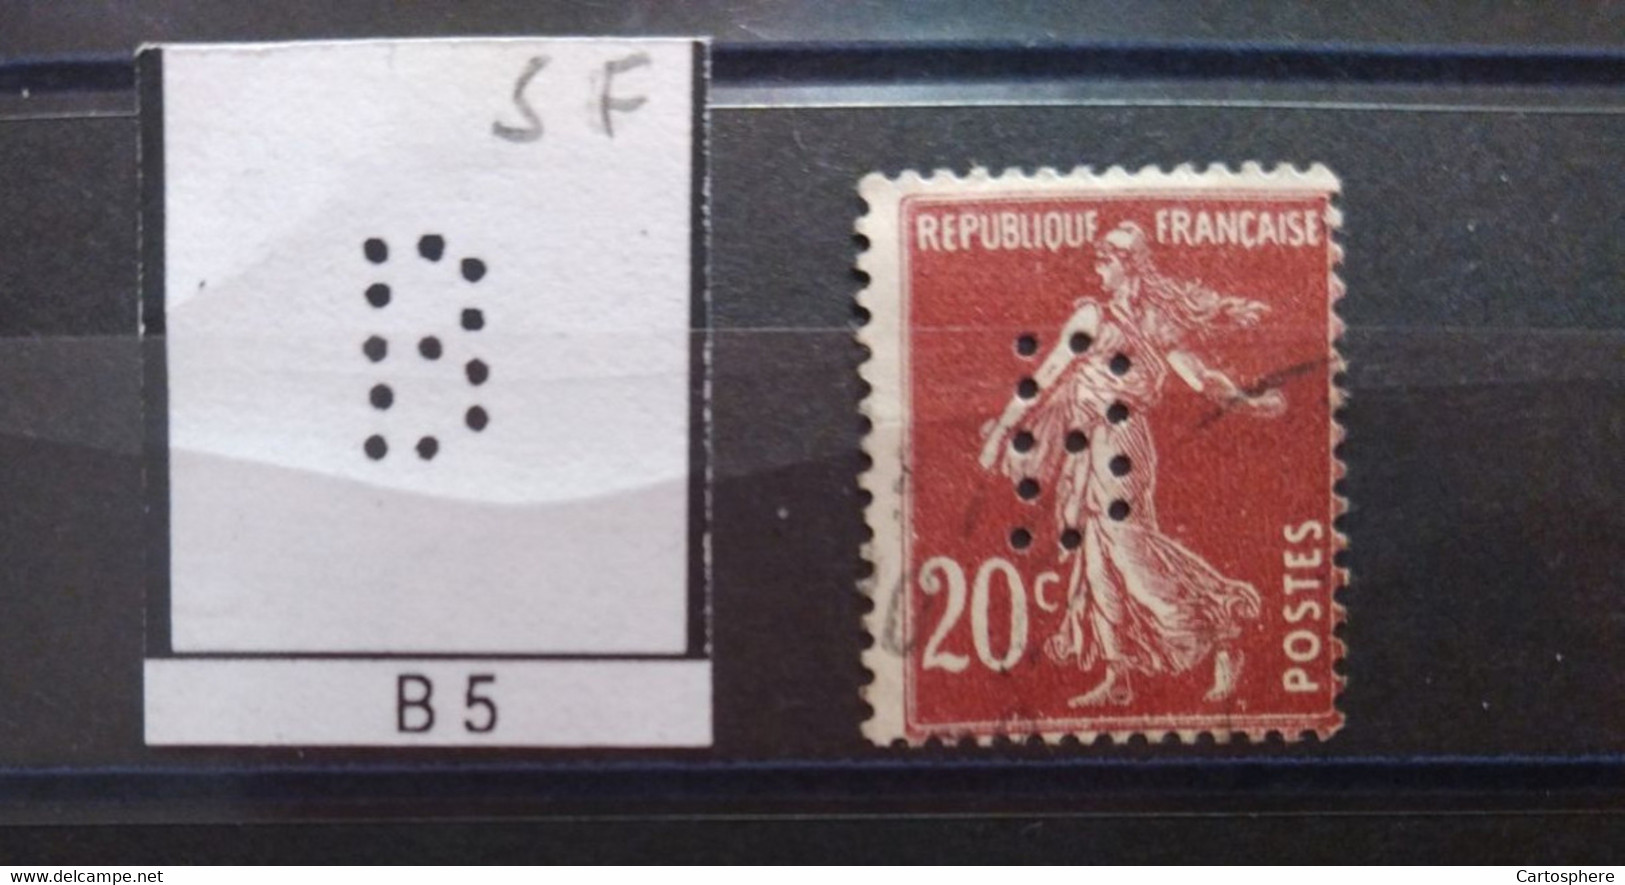 FRANCE B 5 TIMBRE  INDICE 6 SUR 139  PERFORE PERFORES PERFIN PERFINS PERFO PERFORATION PERFORIERT - Used Stamps